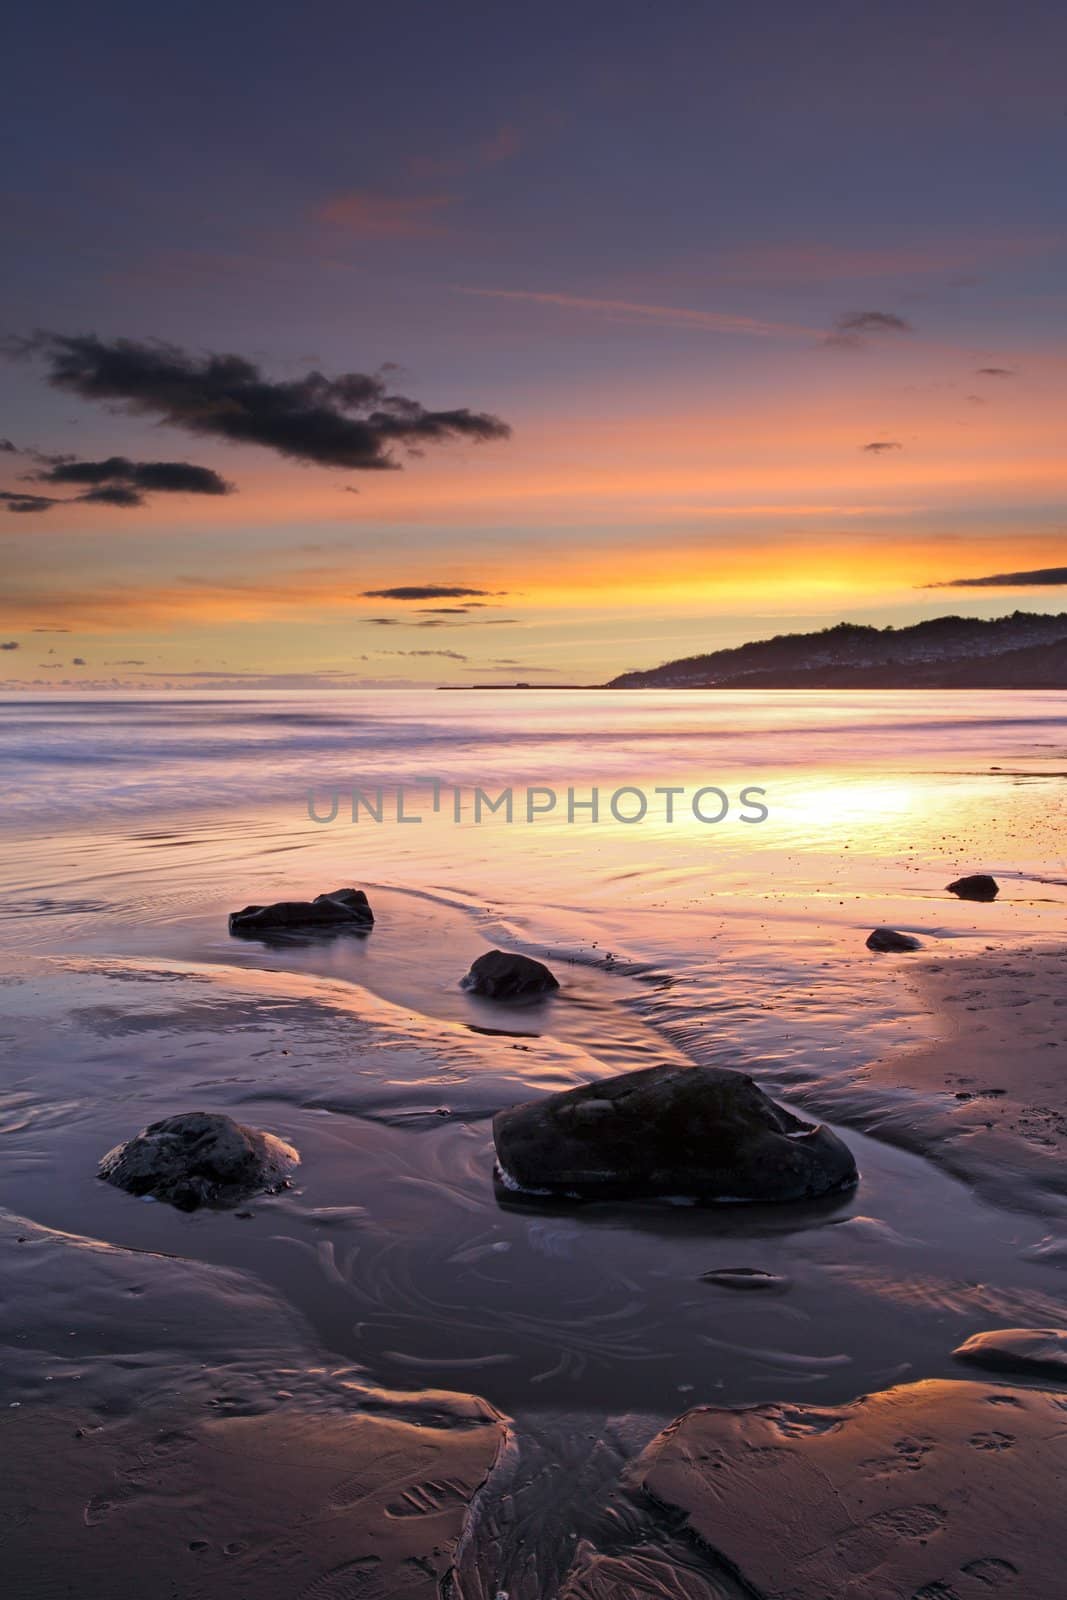 Charmouth beach at sunset looking toward lyme regis